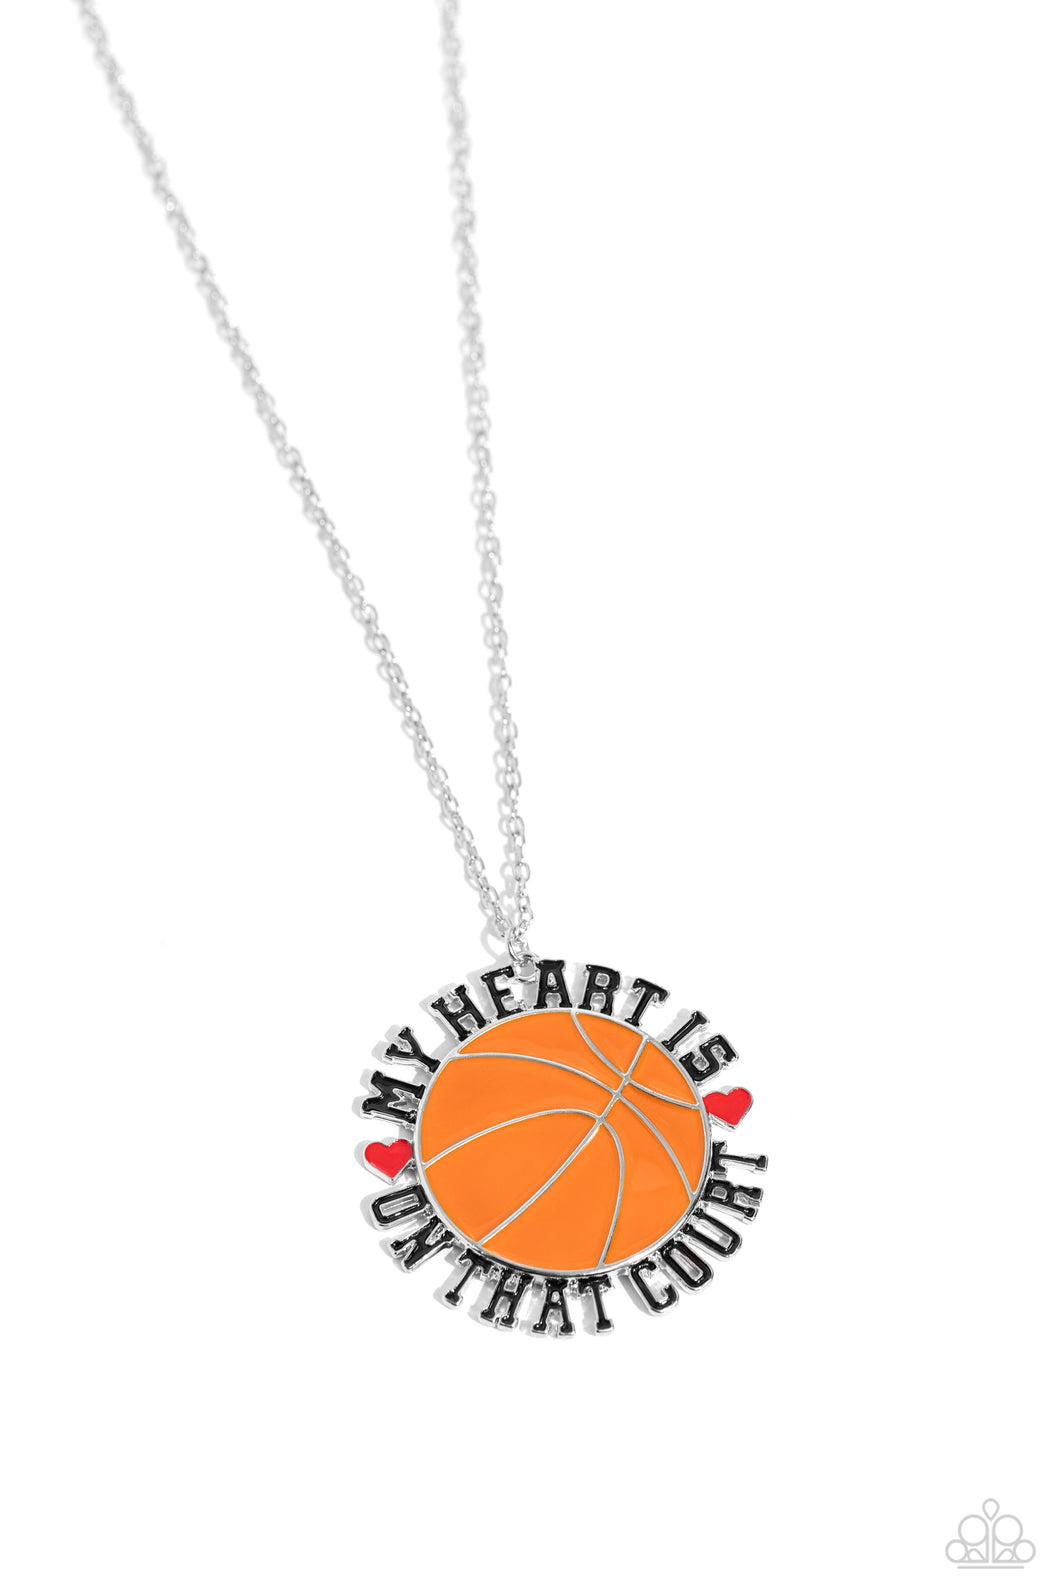 Dangling from an extended dainty silver chain, an oversized orange-painted basketball pendant features the phrase 